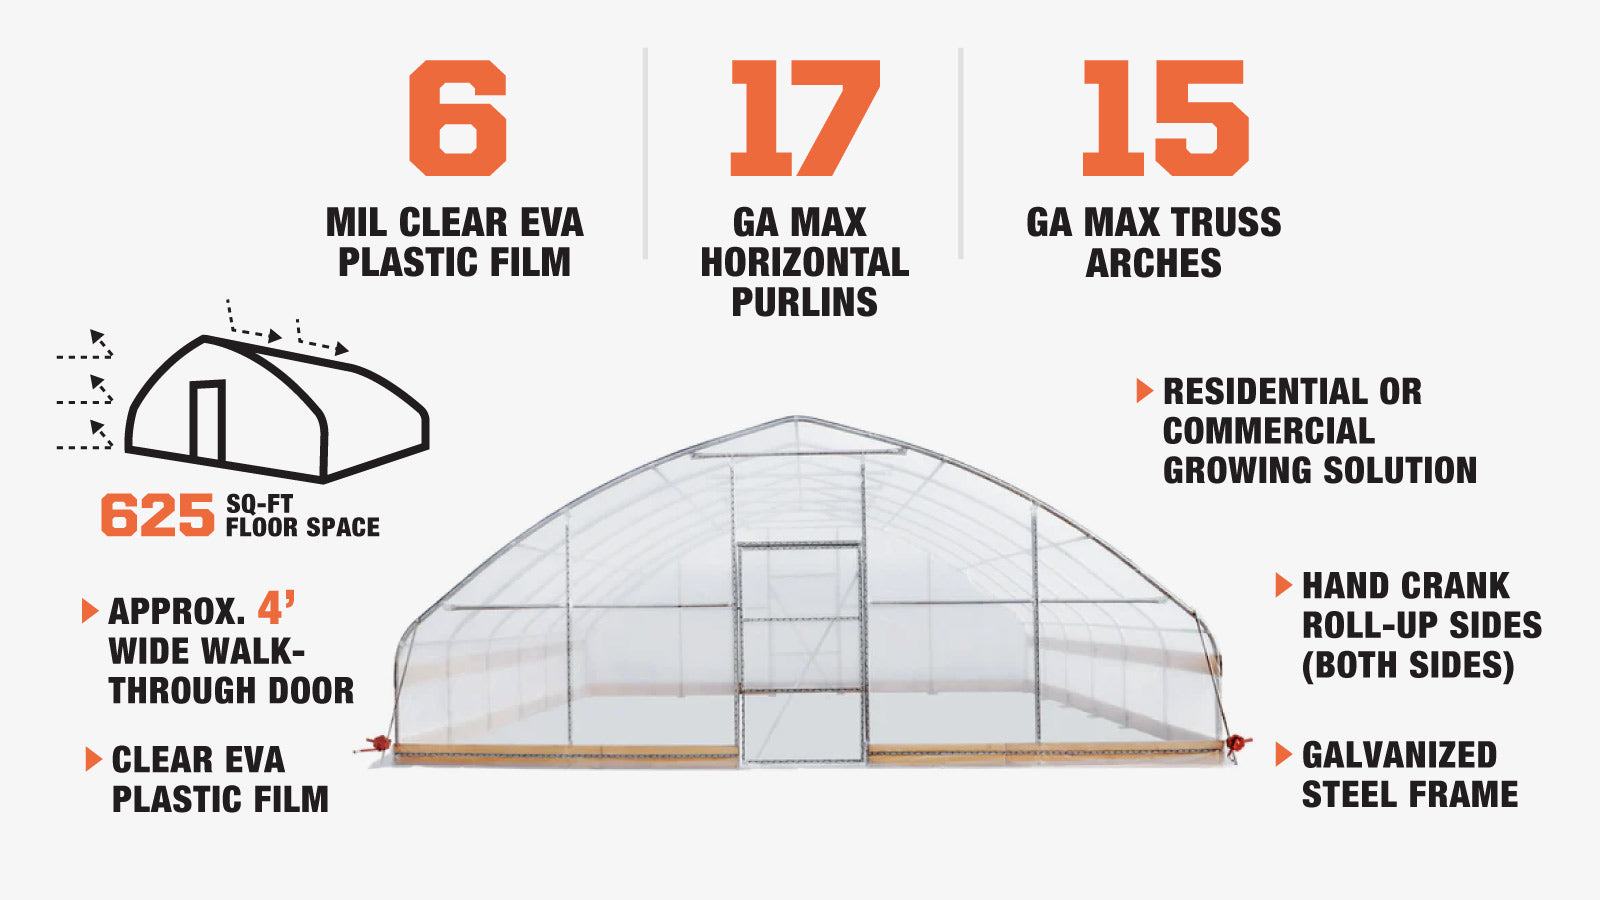 TMG Industrial 25’ x 25’ Tunnel Greenhouse Grow Tent w/6 Mil Clear EVA Plastic Film, Cold Frame, Hand Crank Roll-Up Sides, Peak Ceiling Roof, TMG-GH2525-description-image